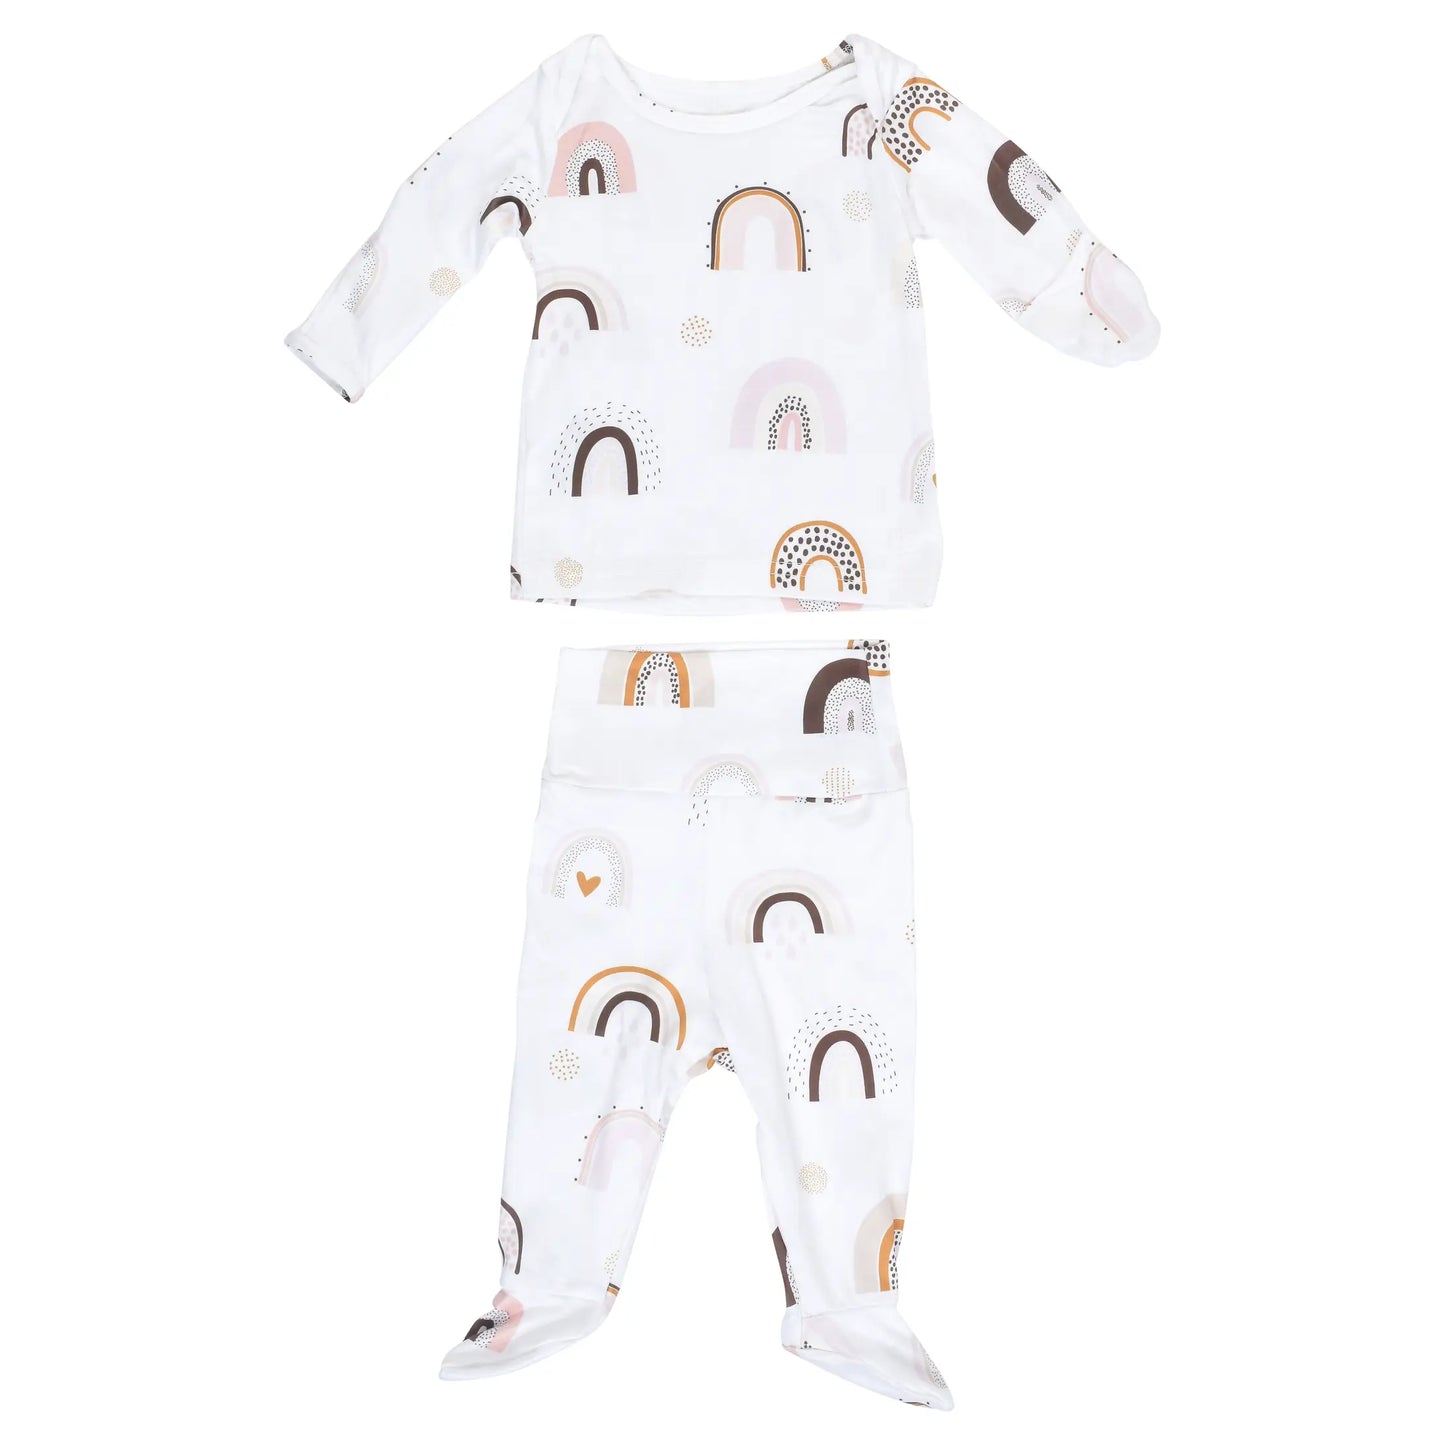 Rainbow Jammies Kids Pjs and Lougewear (Matching with siblings )SOLD OUT